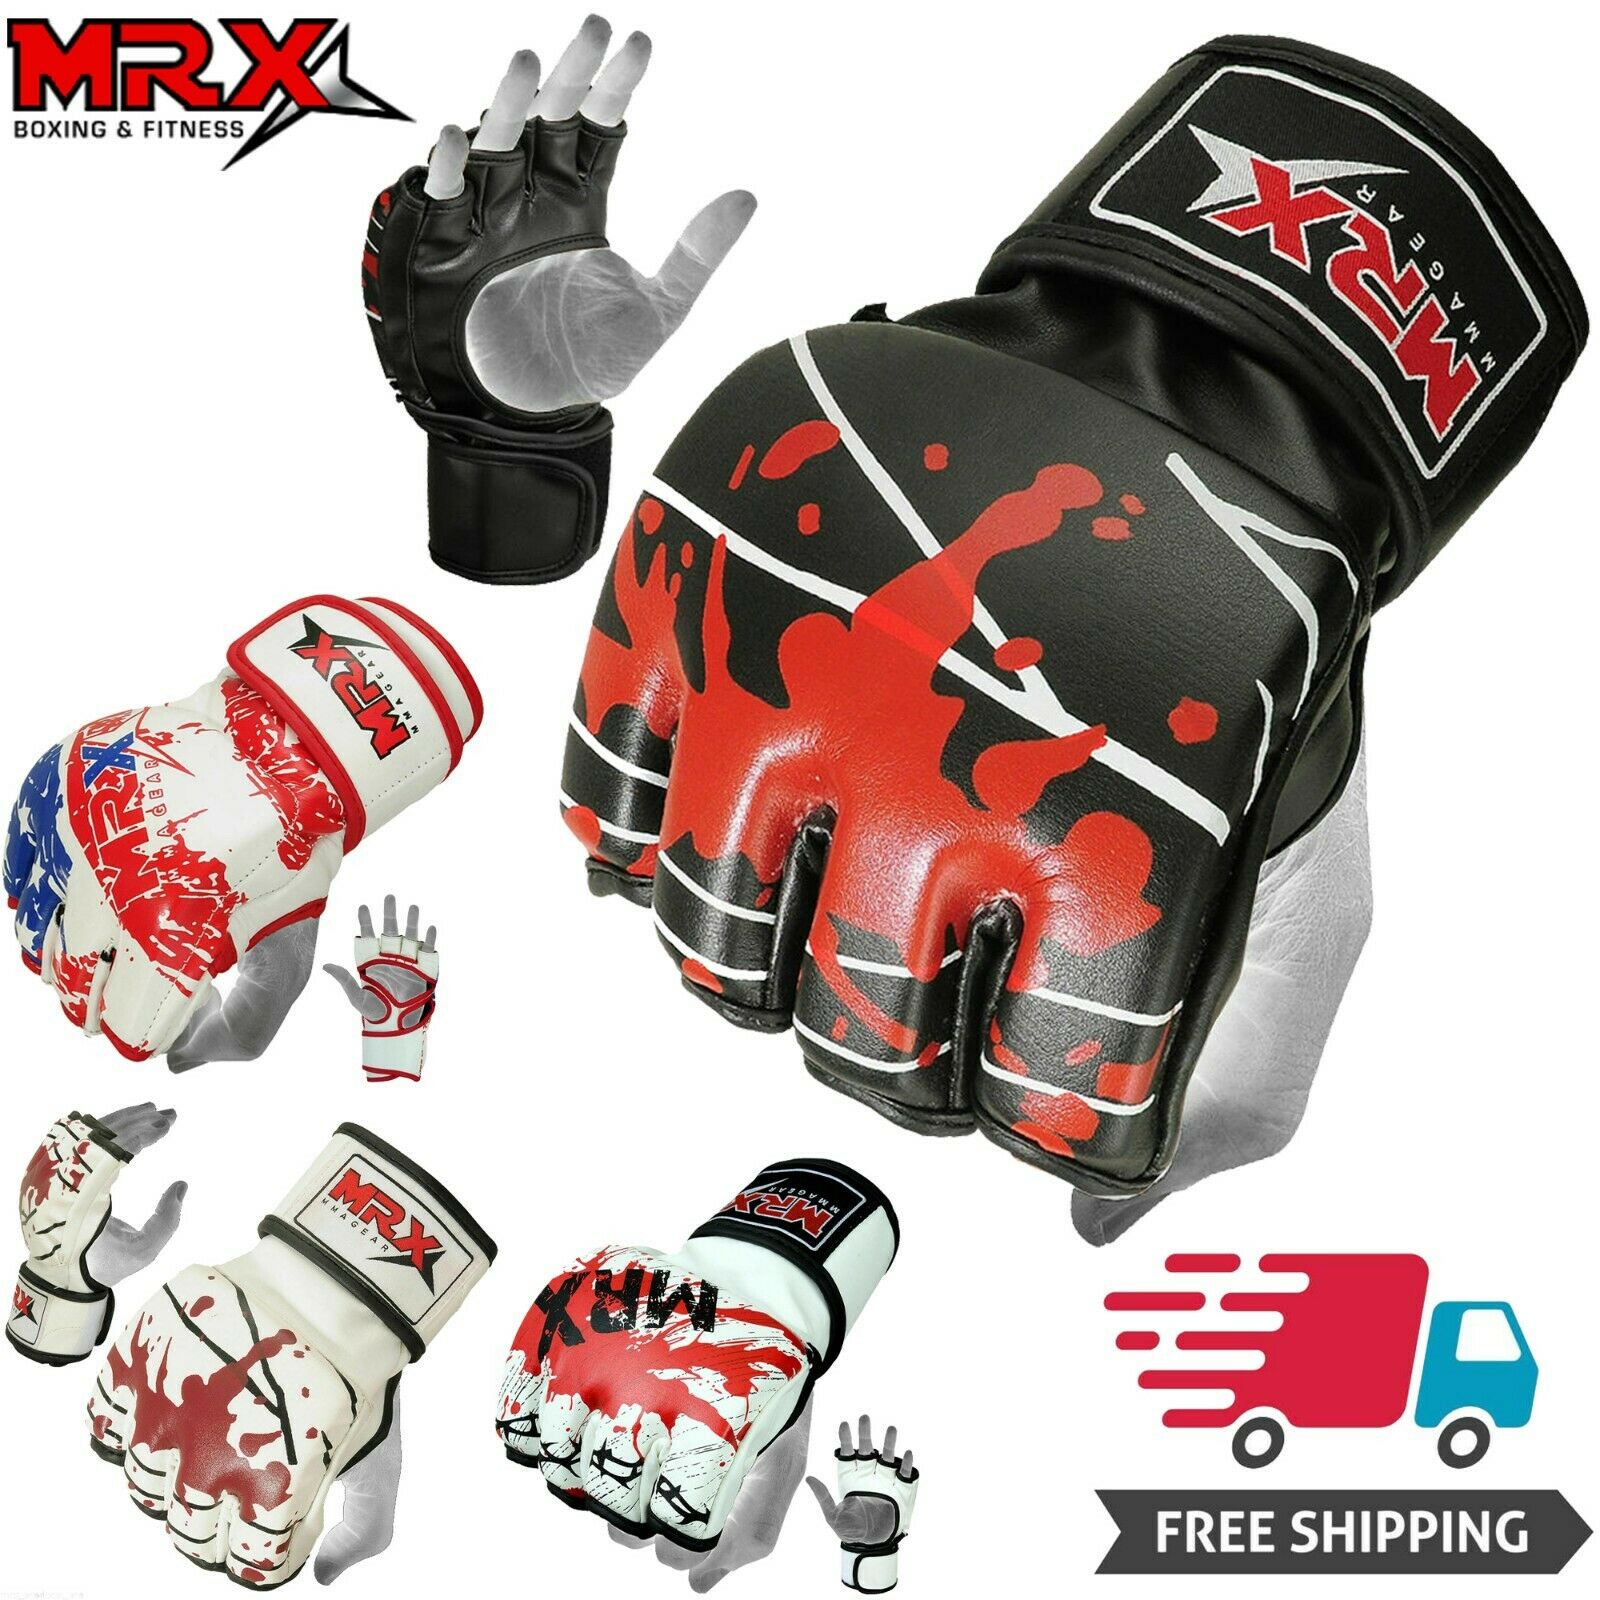 Boxing Mma Gloves Grappling Punching Bag Training Kickboxing Fight Sparring Ufc